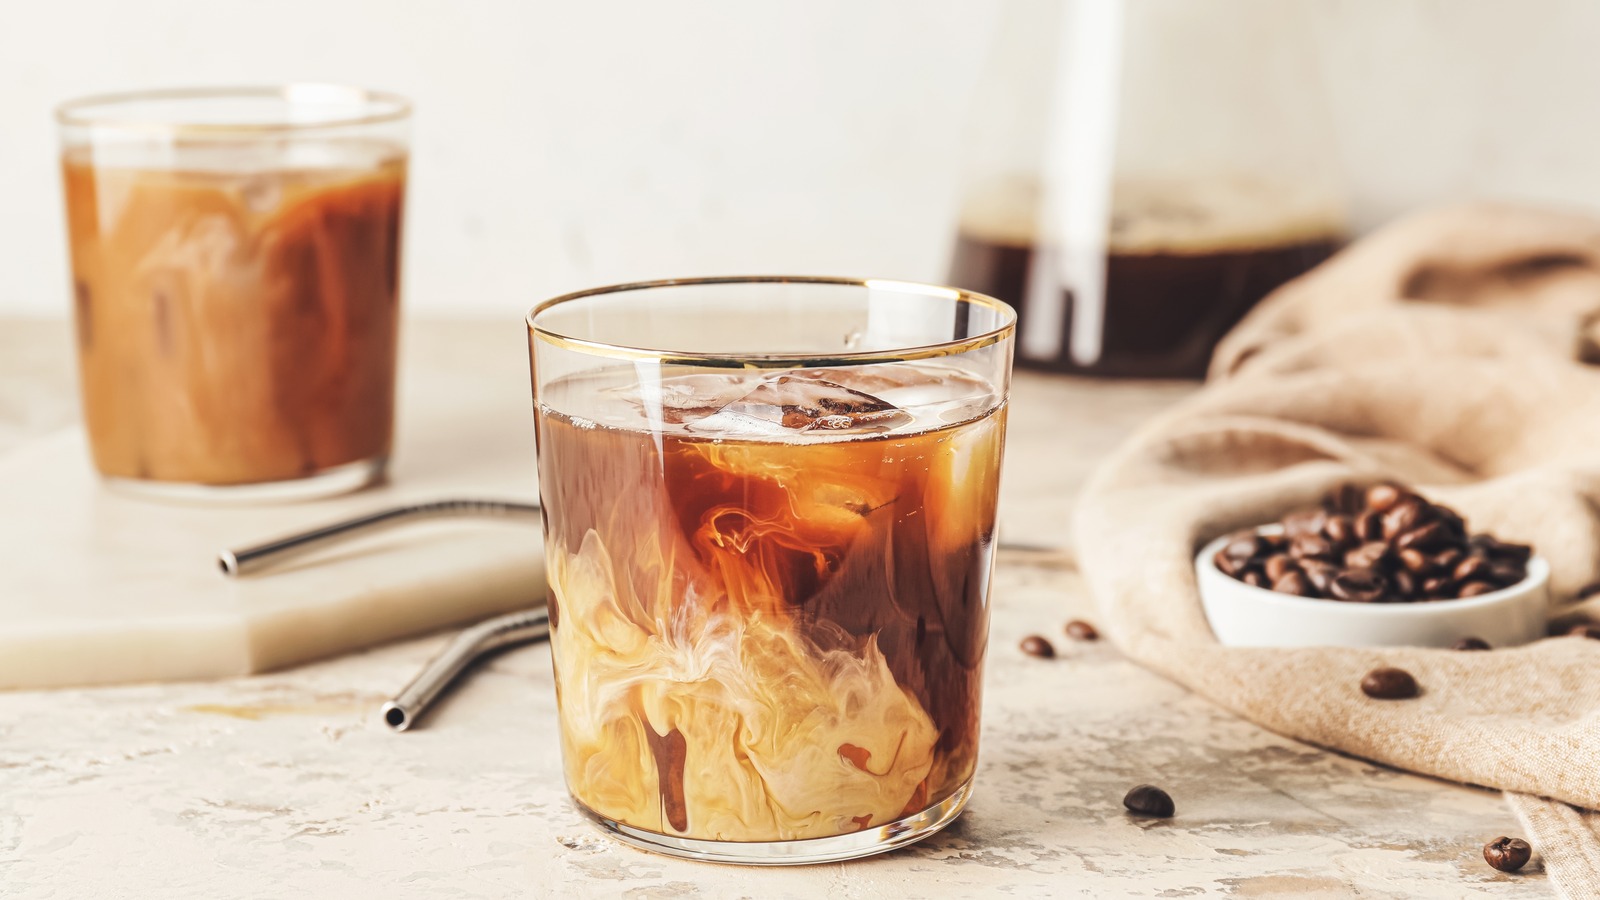 https://www.tastingtable.com/img/gallery/bring-fall-flavor-to-your-iced-coffee-without-any-pumpkin-in-sight/l-intro-1692397316.jpg